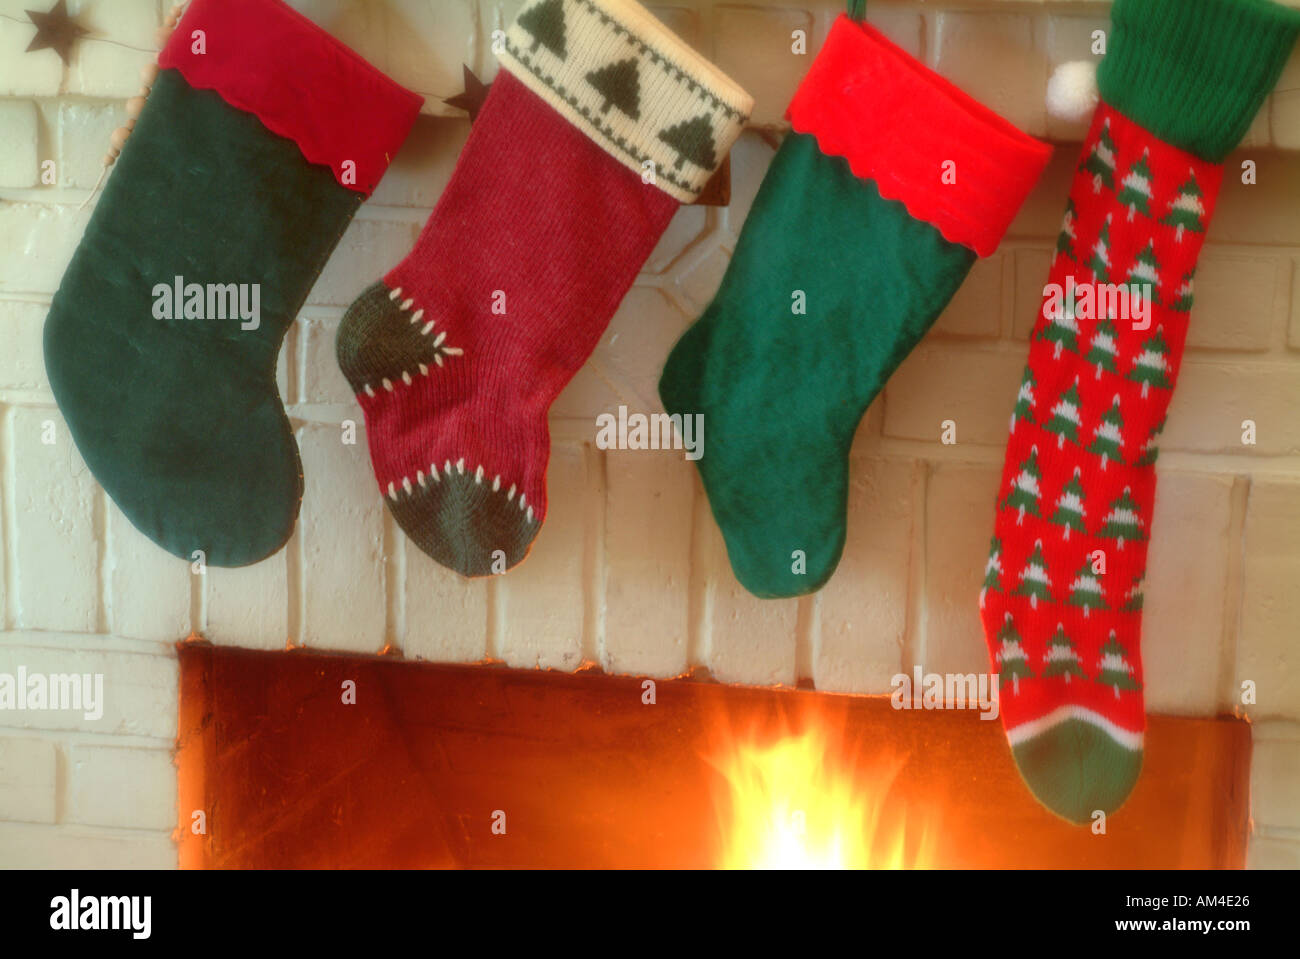 https://c8.alamy.com/comp/AM4E26/christmas-stockings-hung-on-the-mantle-with-care-a-fire-burns-in-the-AM4E26.jpg